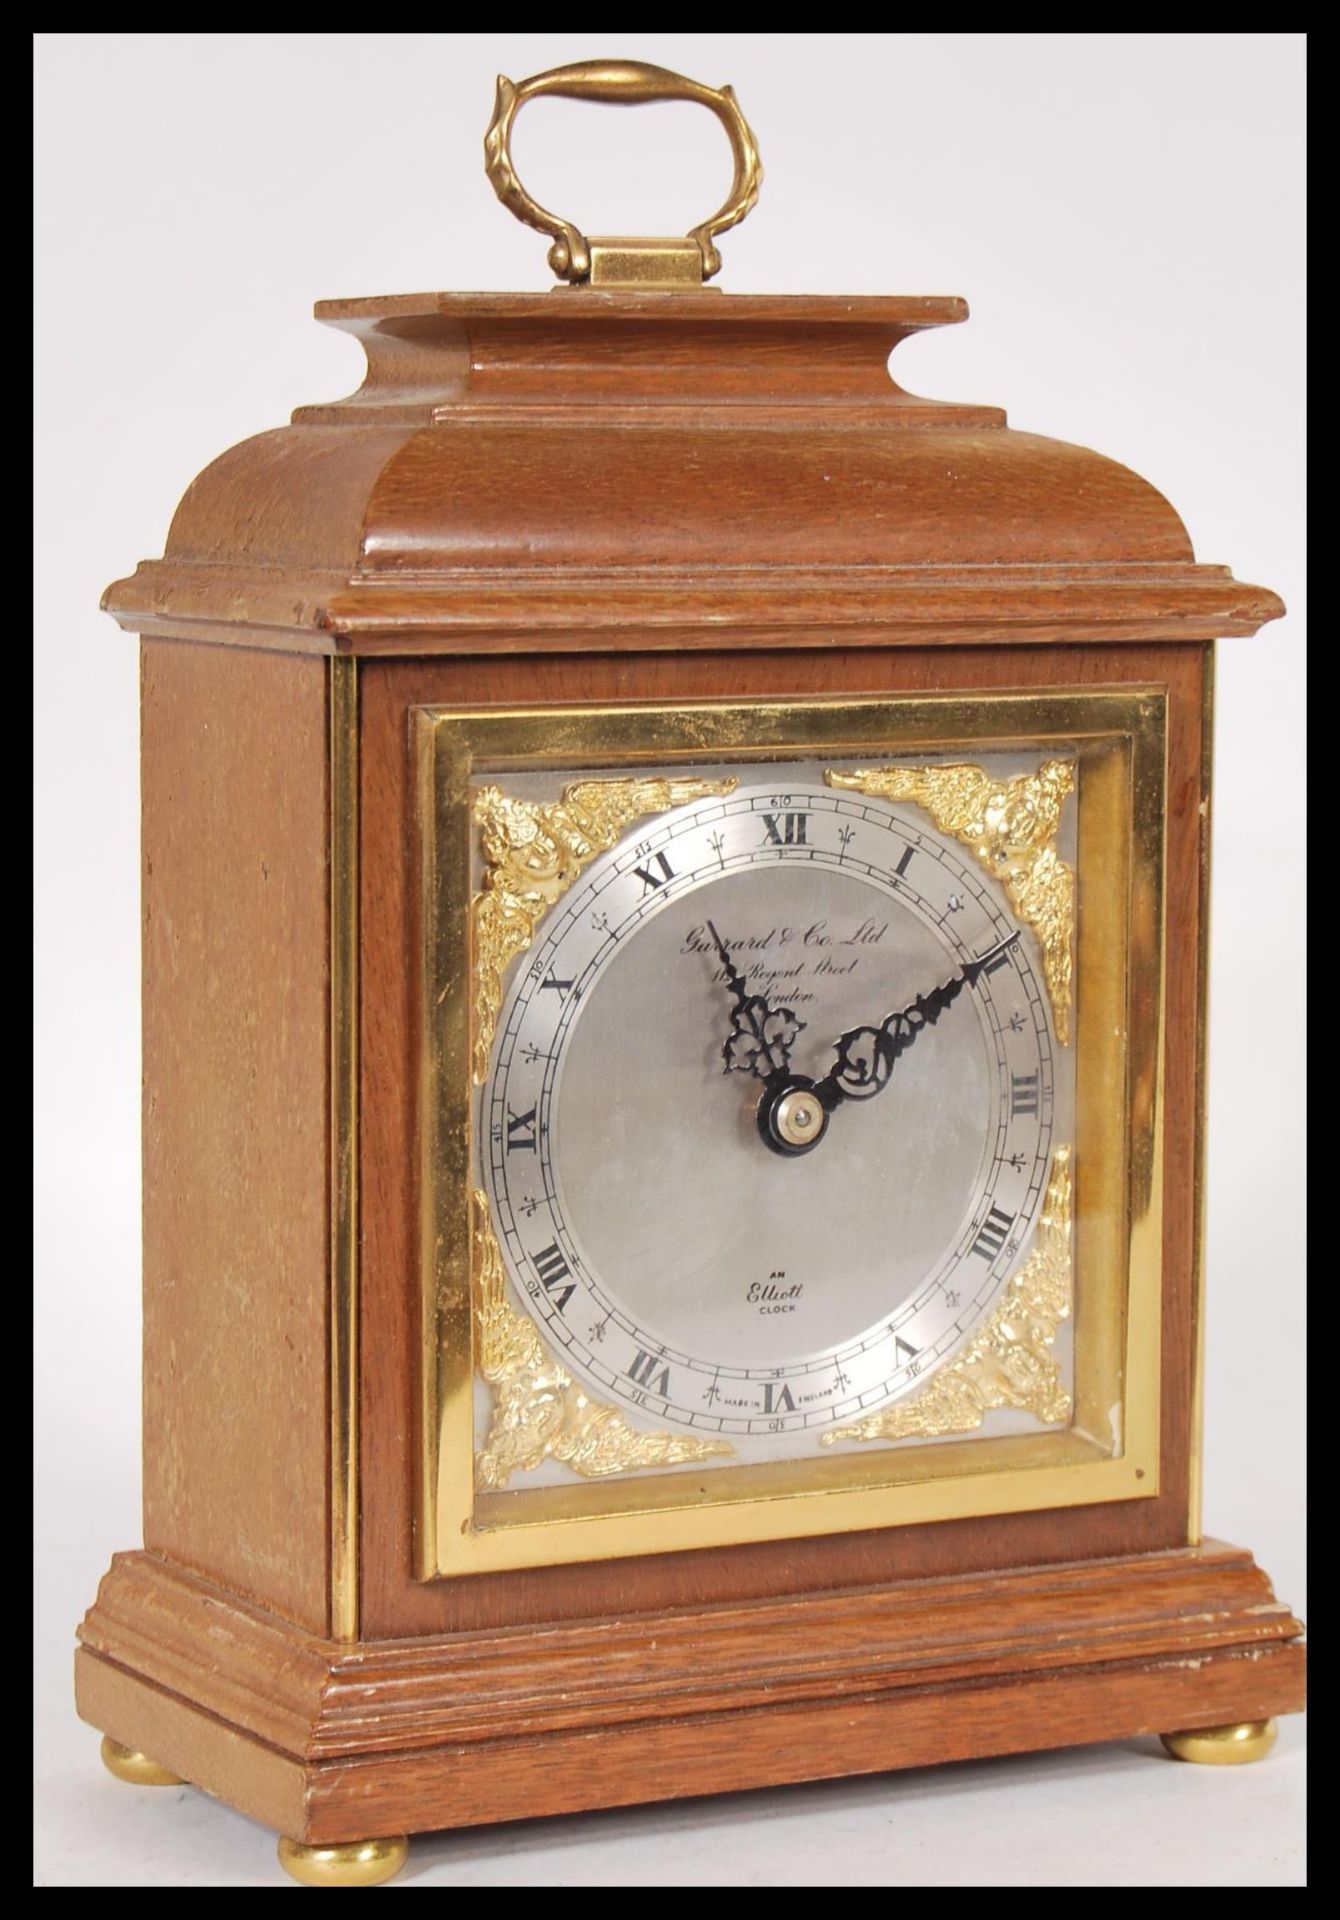 A 20th Century Elliot mantel clock retailed by Garrard & Co Ltd, having a silvered face with roman